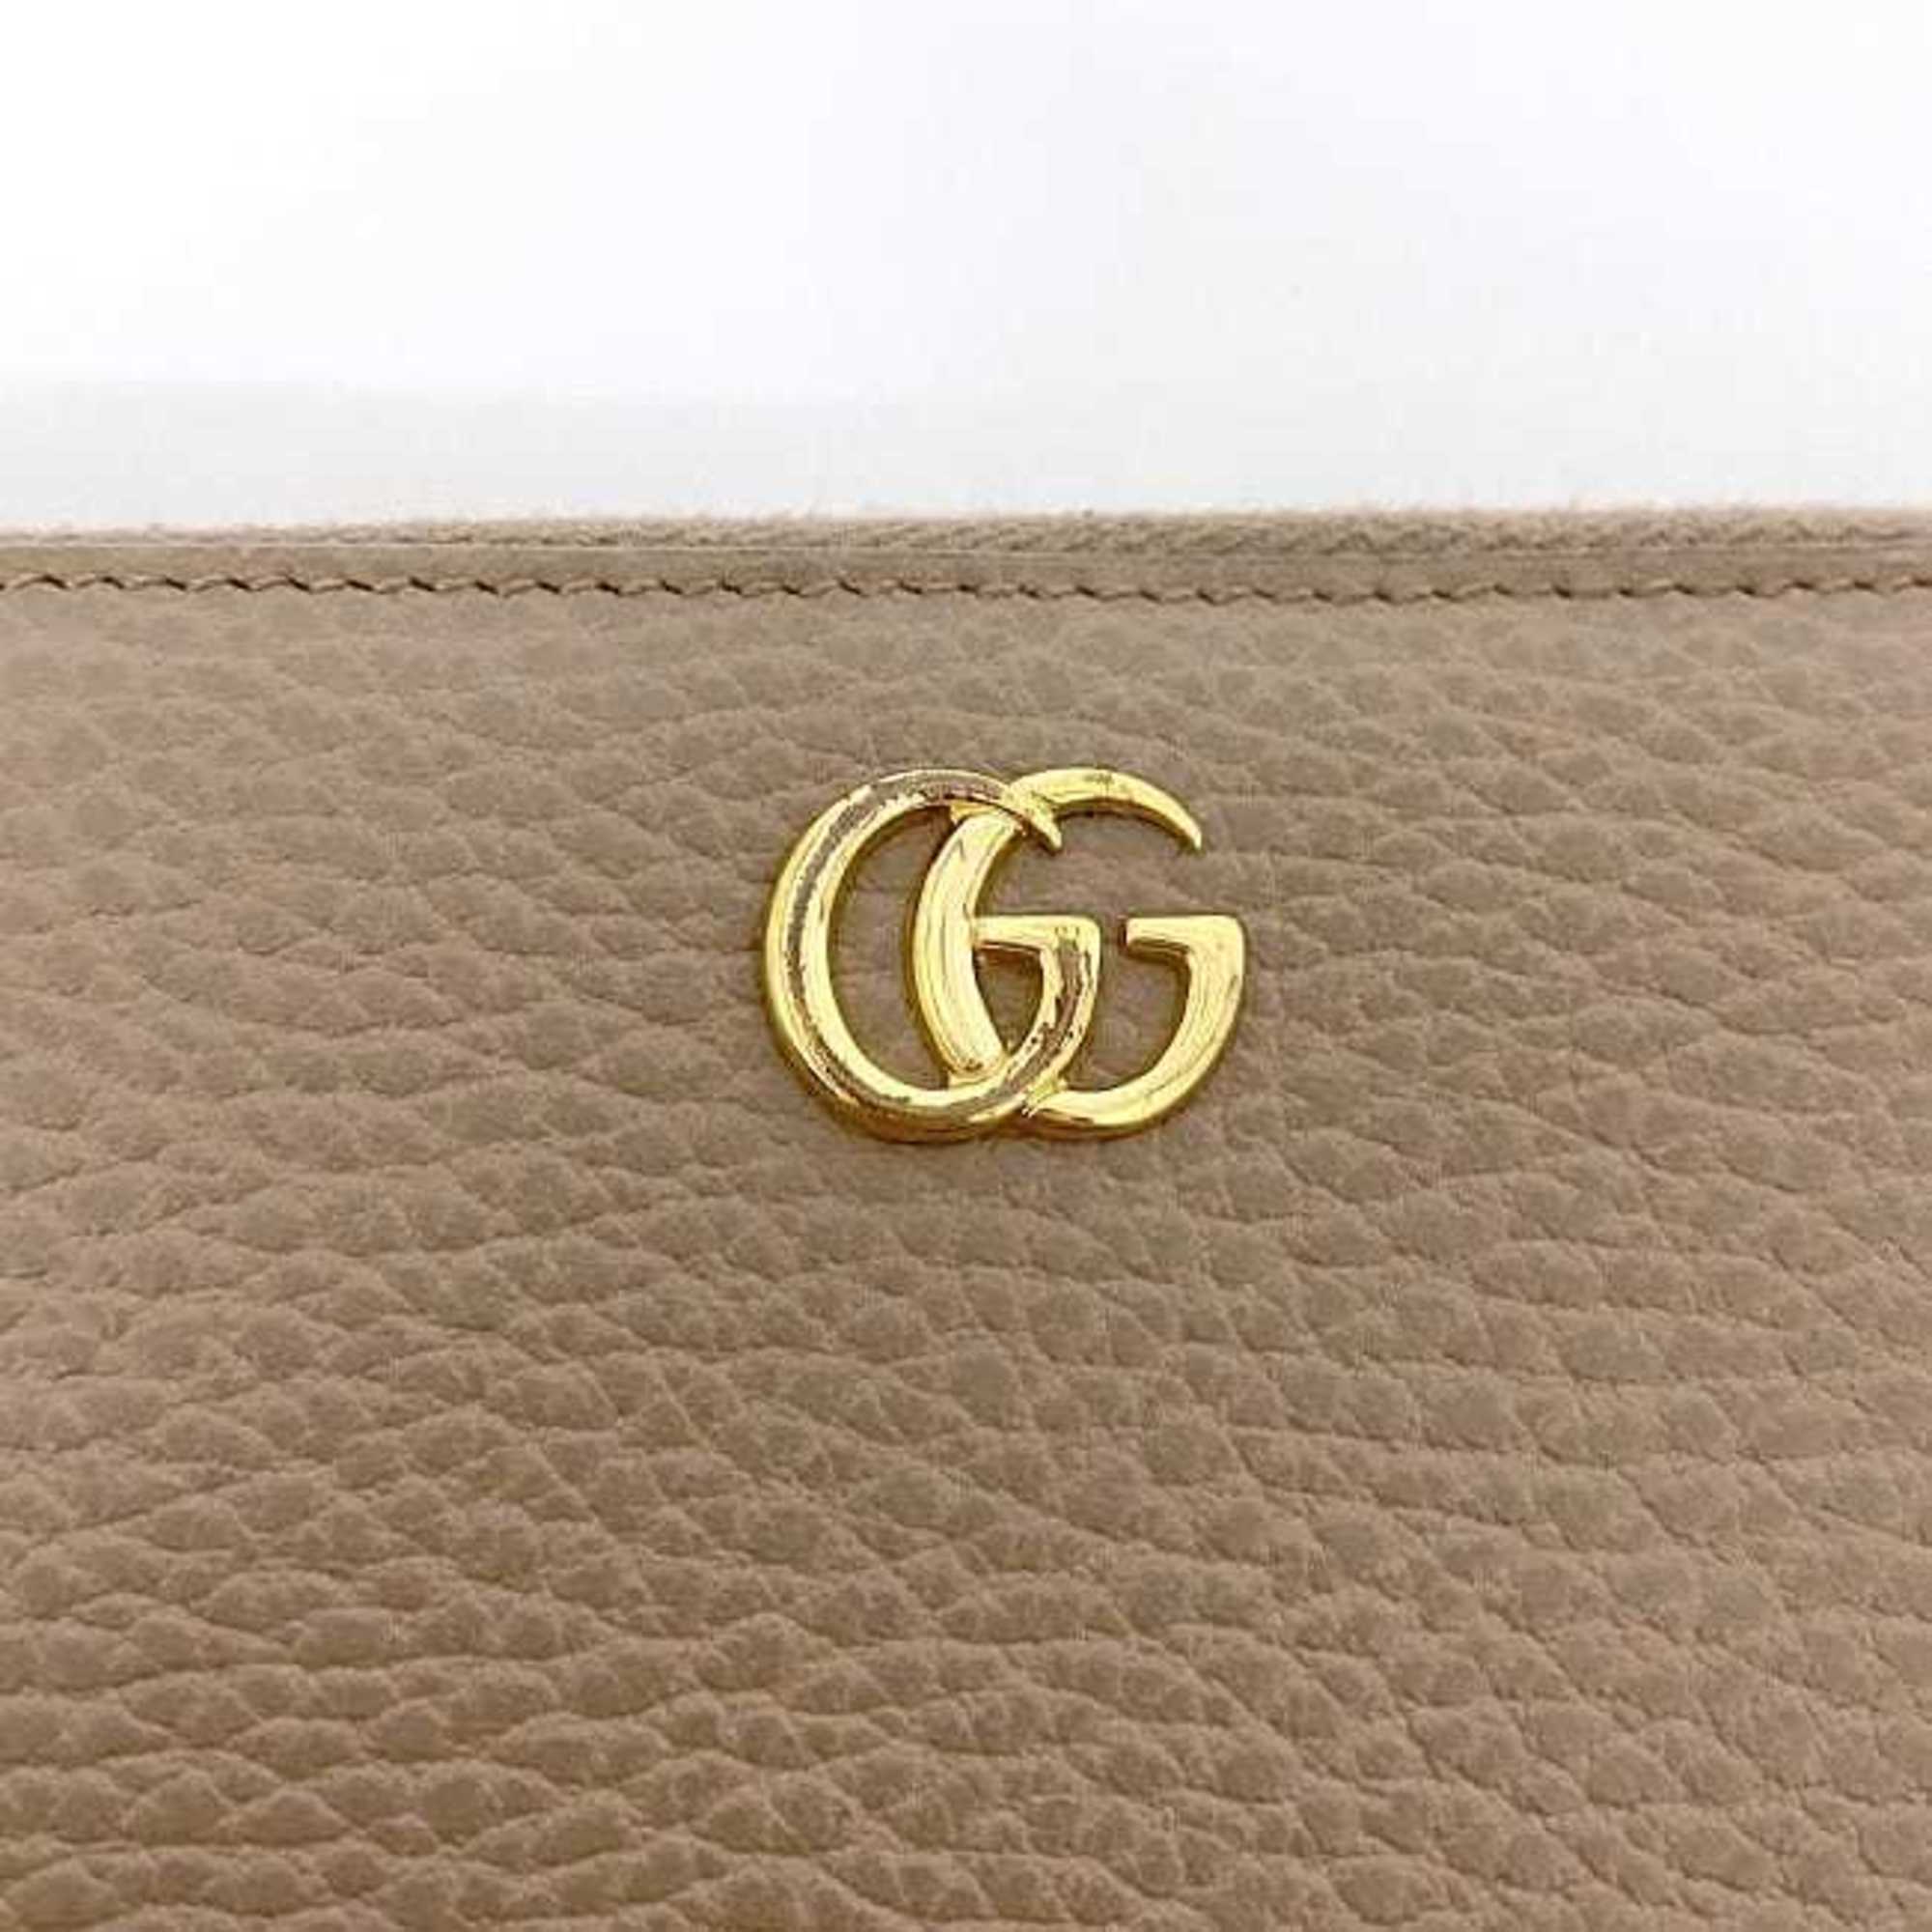 Gucci Round Long Wallet Pink Beige Gold Marmont 456117 Leather GUCCI GG Women's